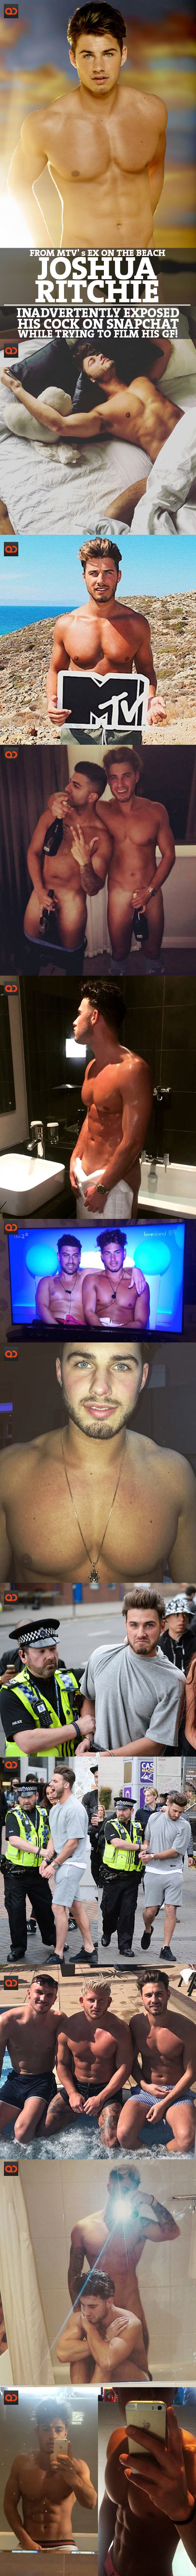 Joshua Ritchie, From TV Show Ex On The Beach, Inadvertently Exposed His Cock On Snapchat While Trying To Film His GF!